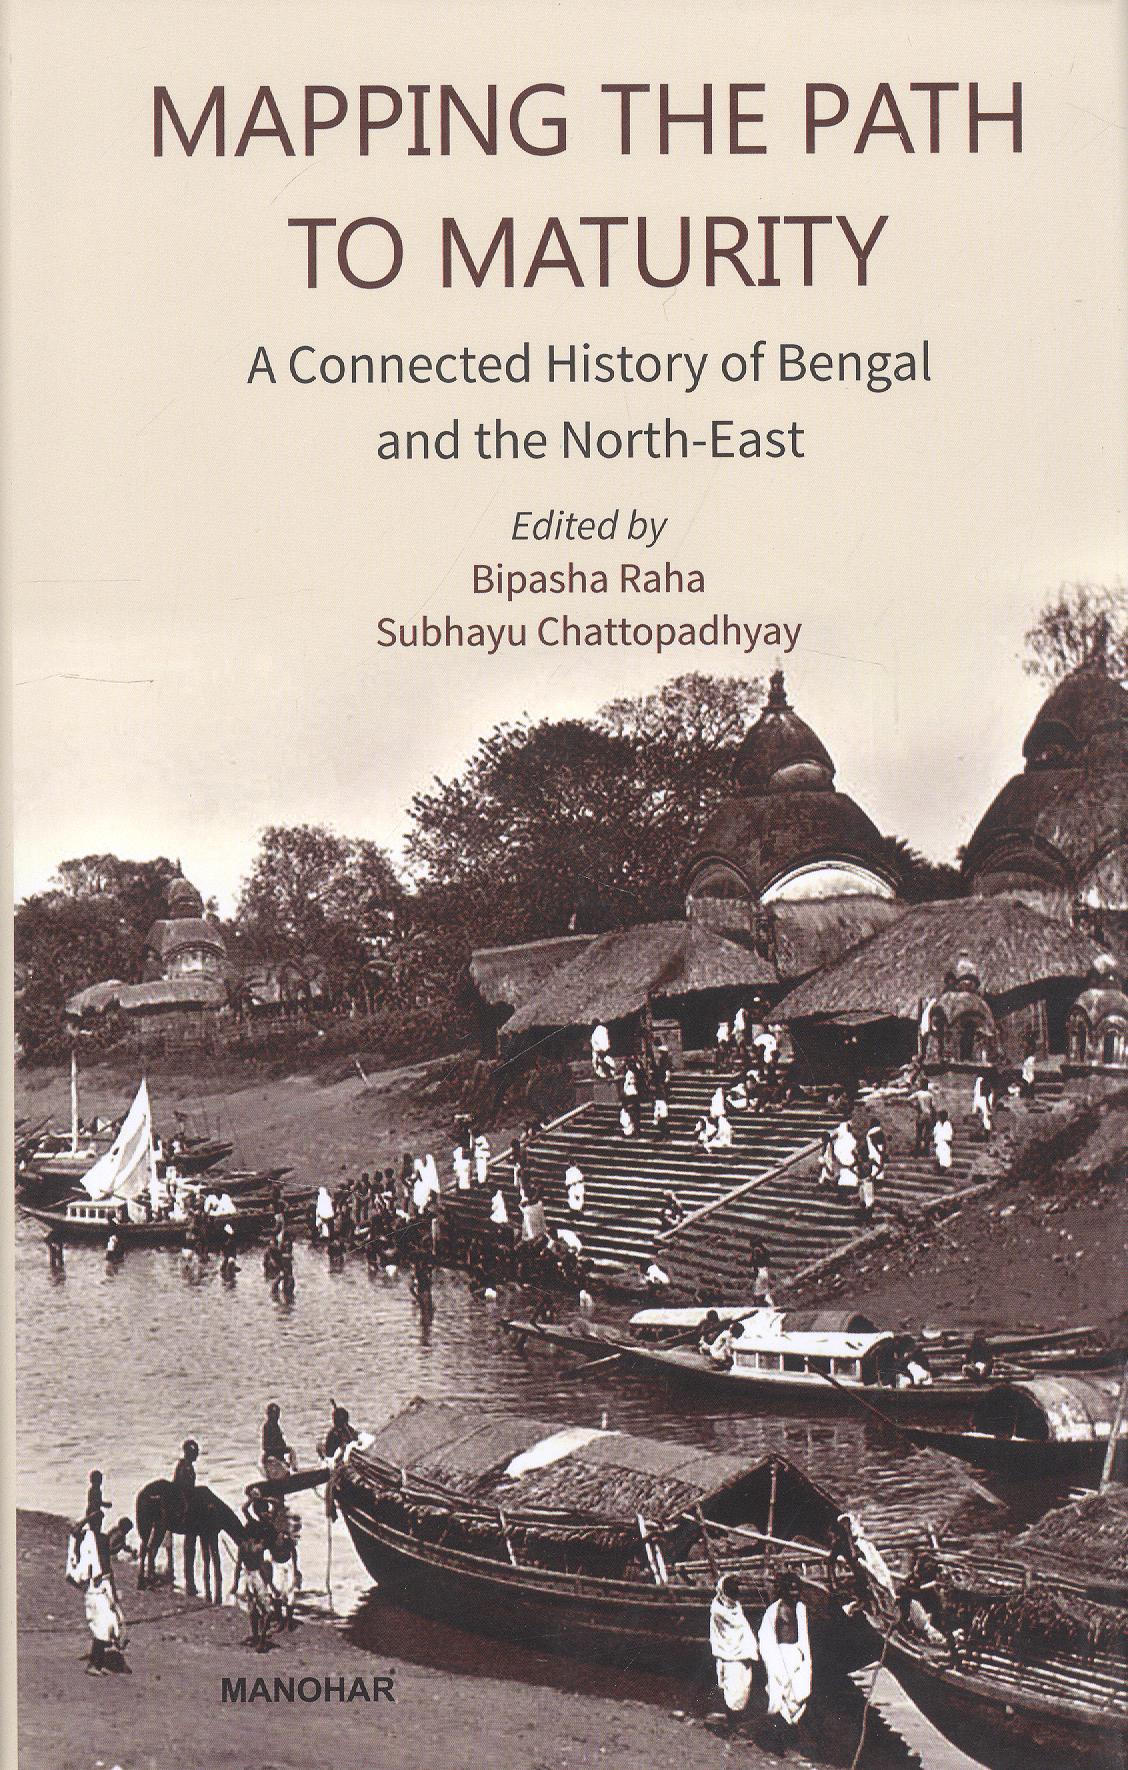 Mapping The Path To Maturity: A Connected History of Bengal and the North-East